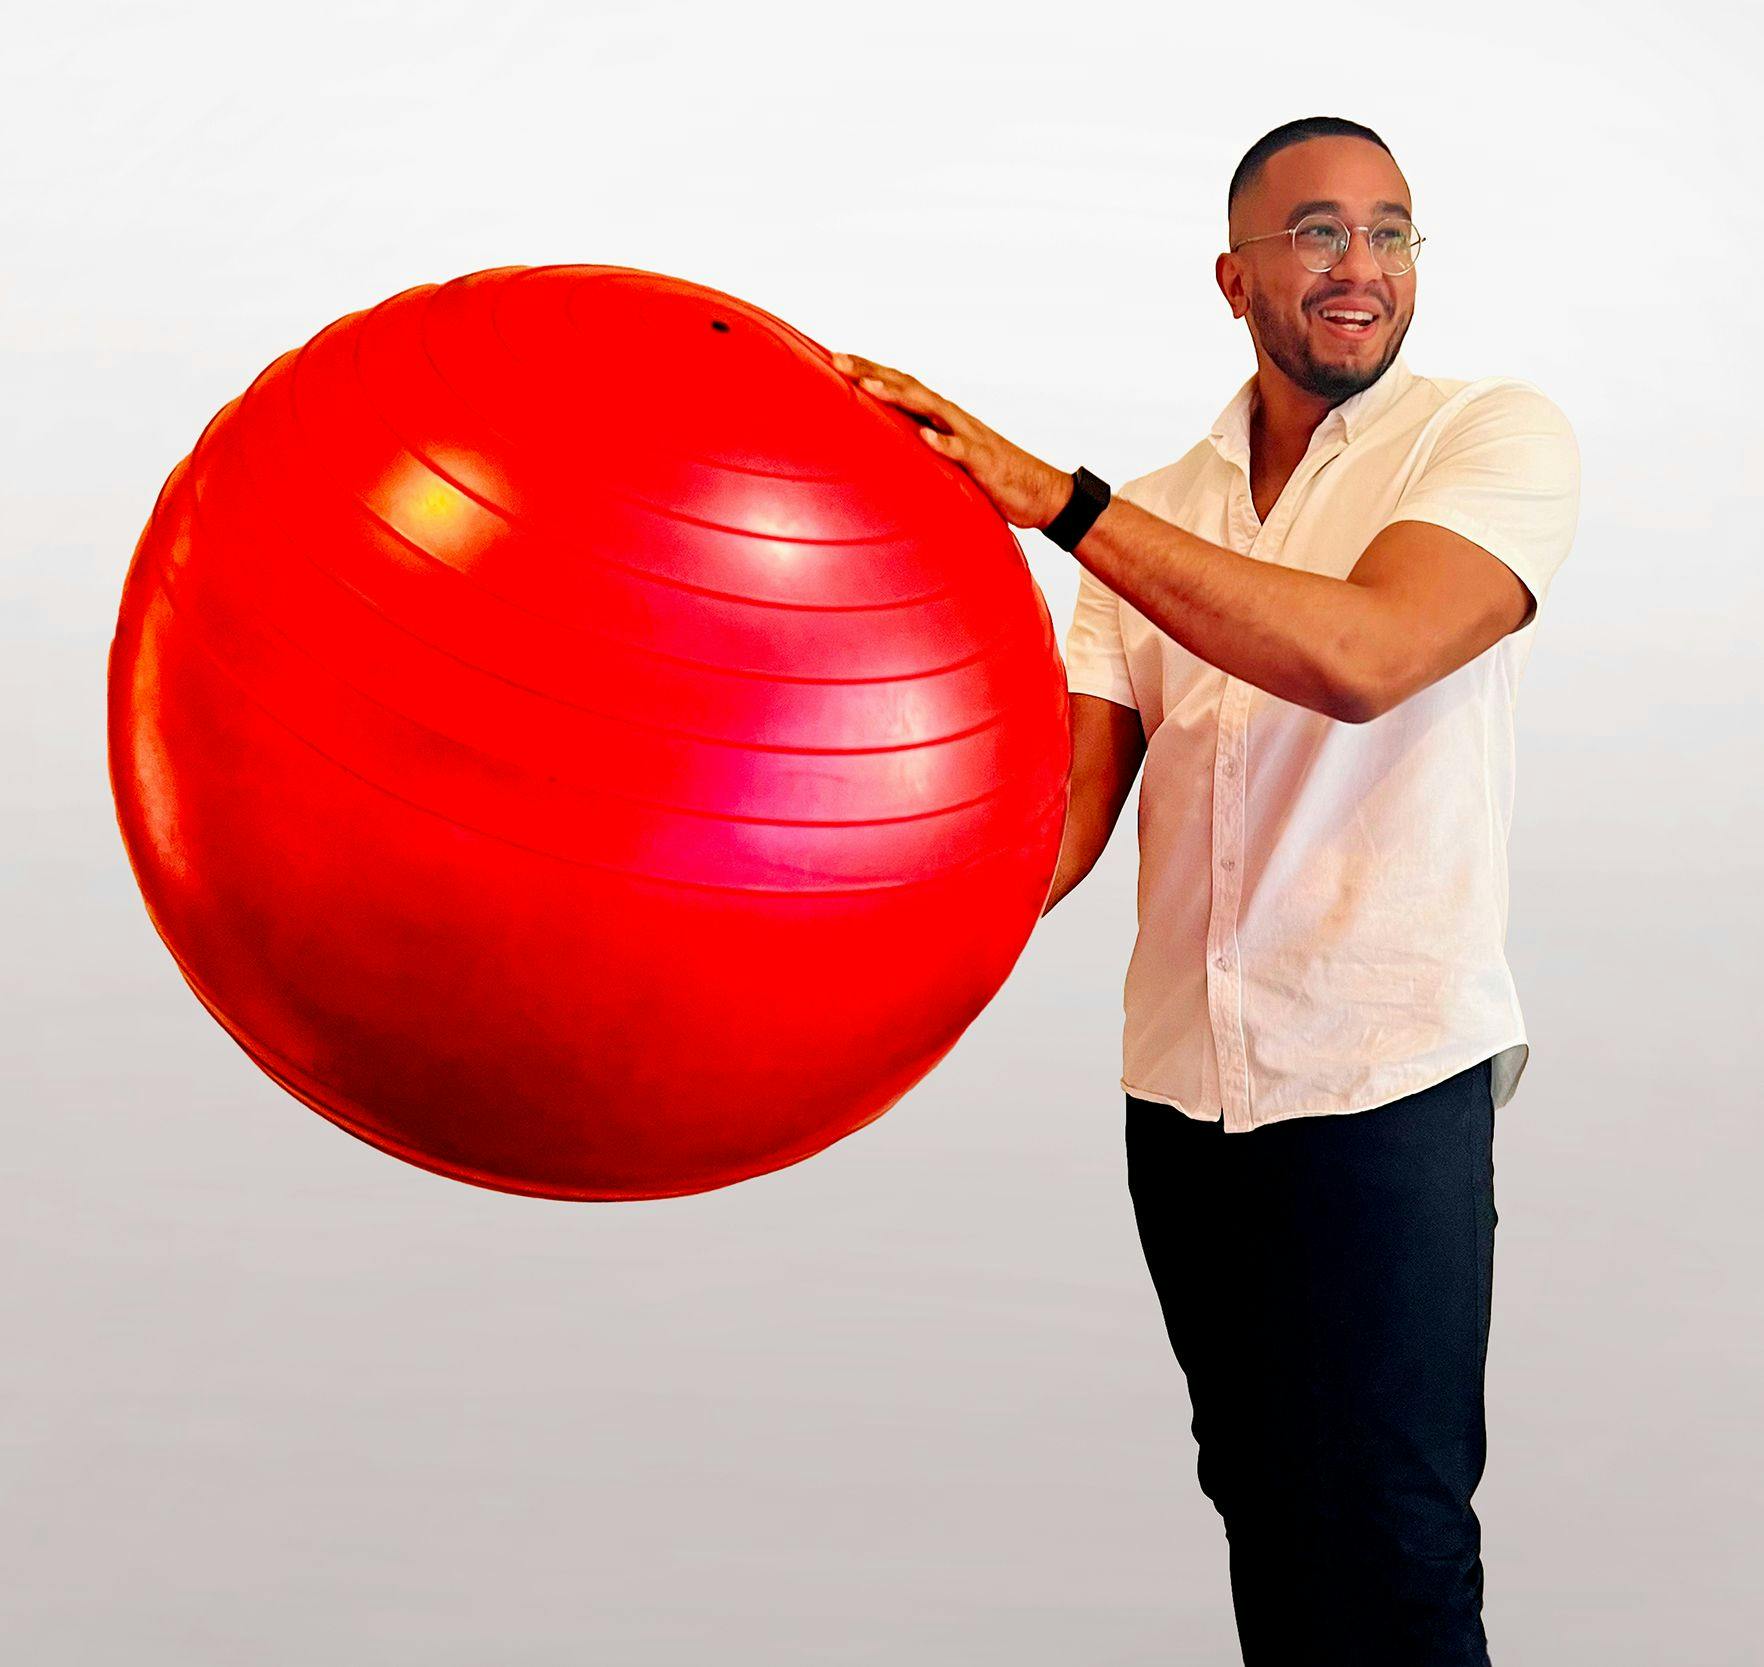 Jean-Marc holding a red fit ball